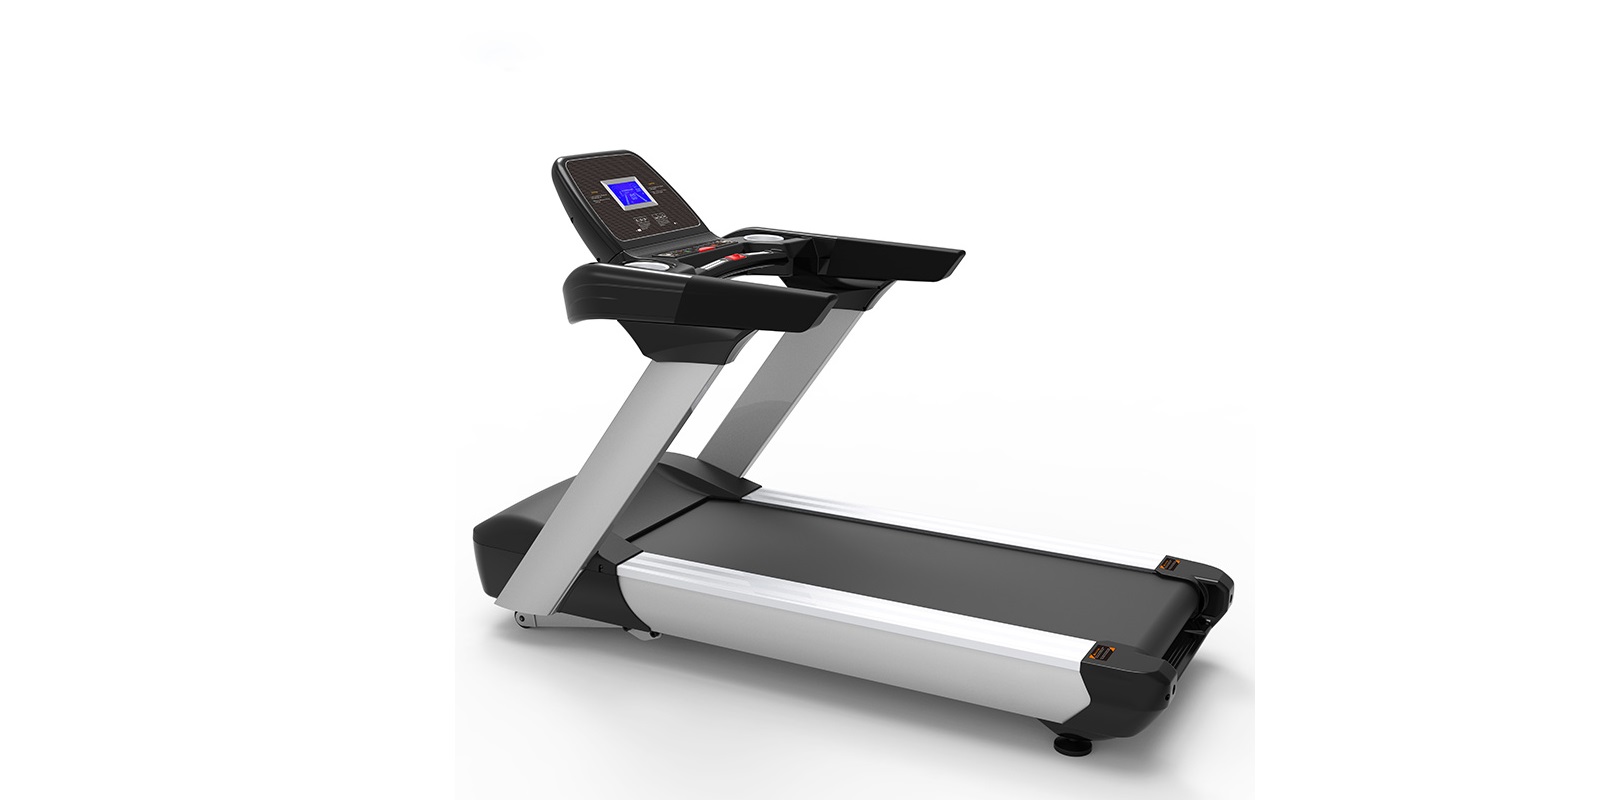 Reasons For Buying A Small Treadmill For Home